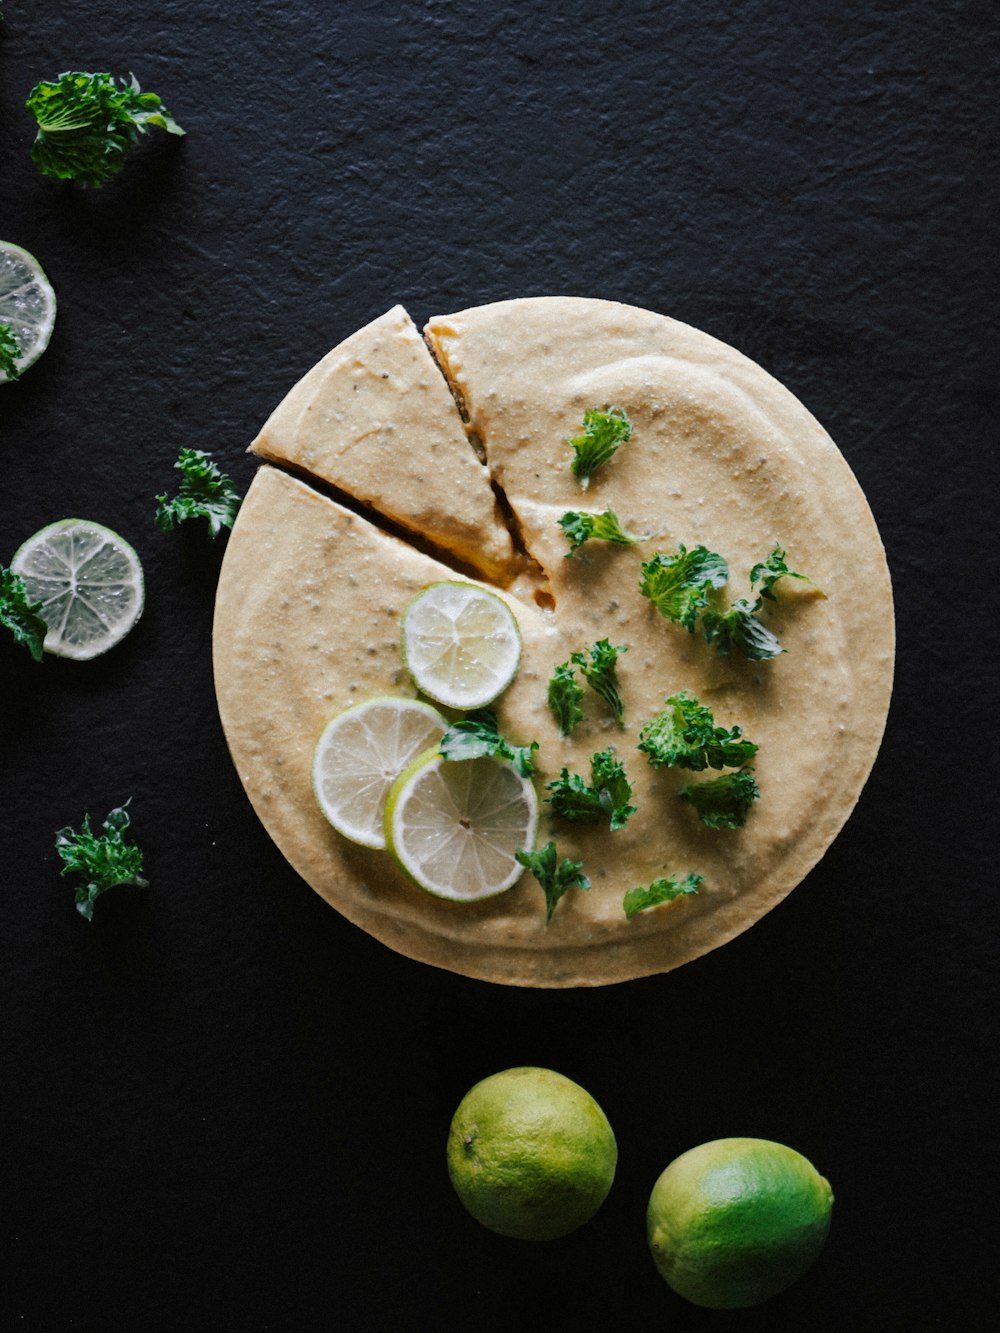 a tortilla with limes and a slice of lime